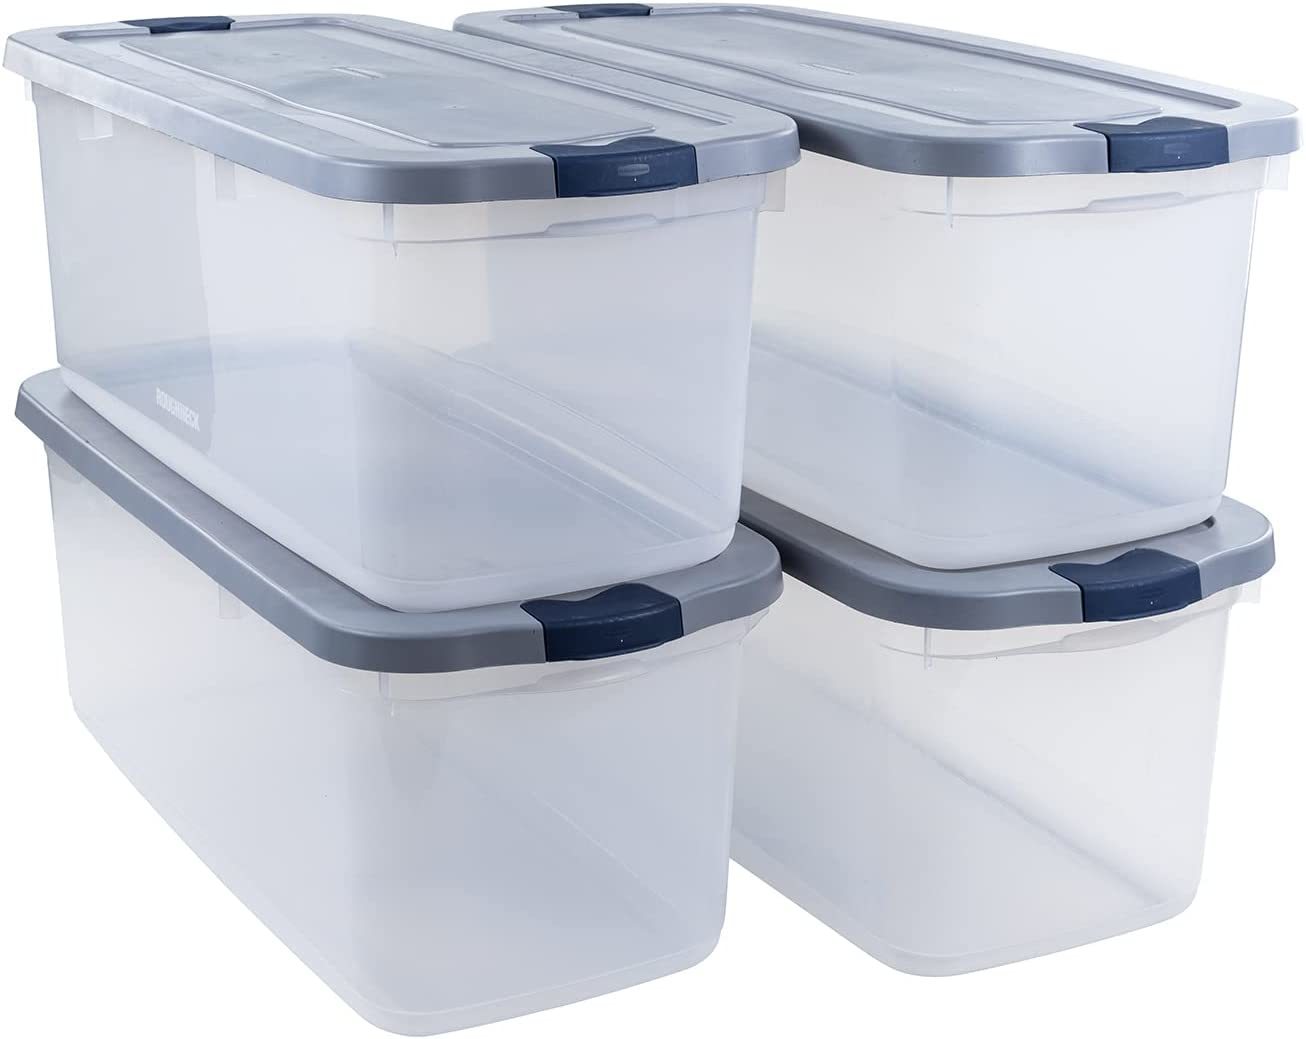 Rubbermaid Roughneck Clear 95 Qt/23.75 Gal Storage Containers, Pack Of 4 With - $175.99